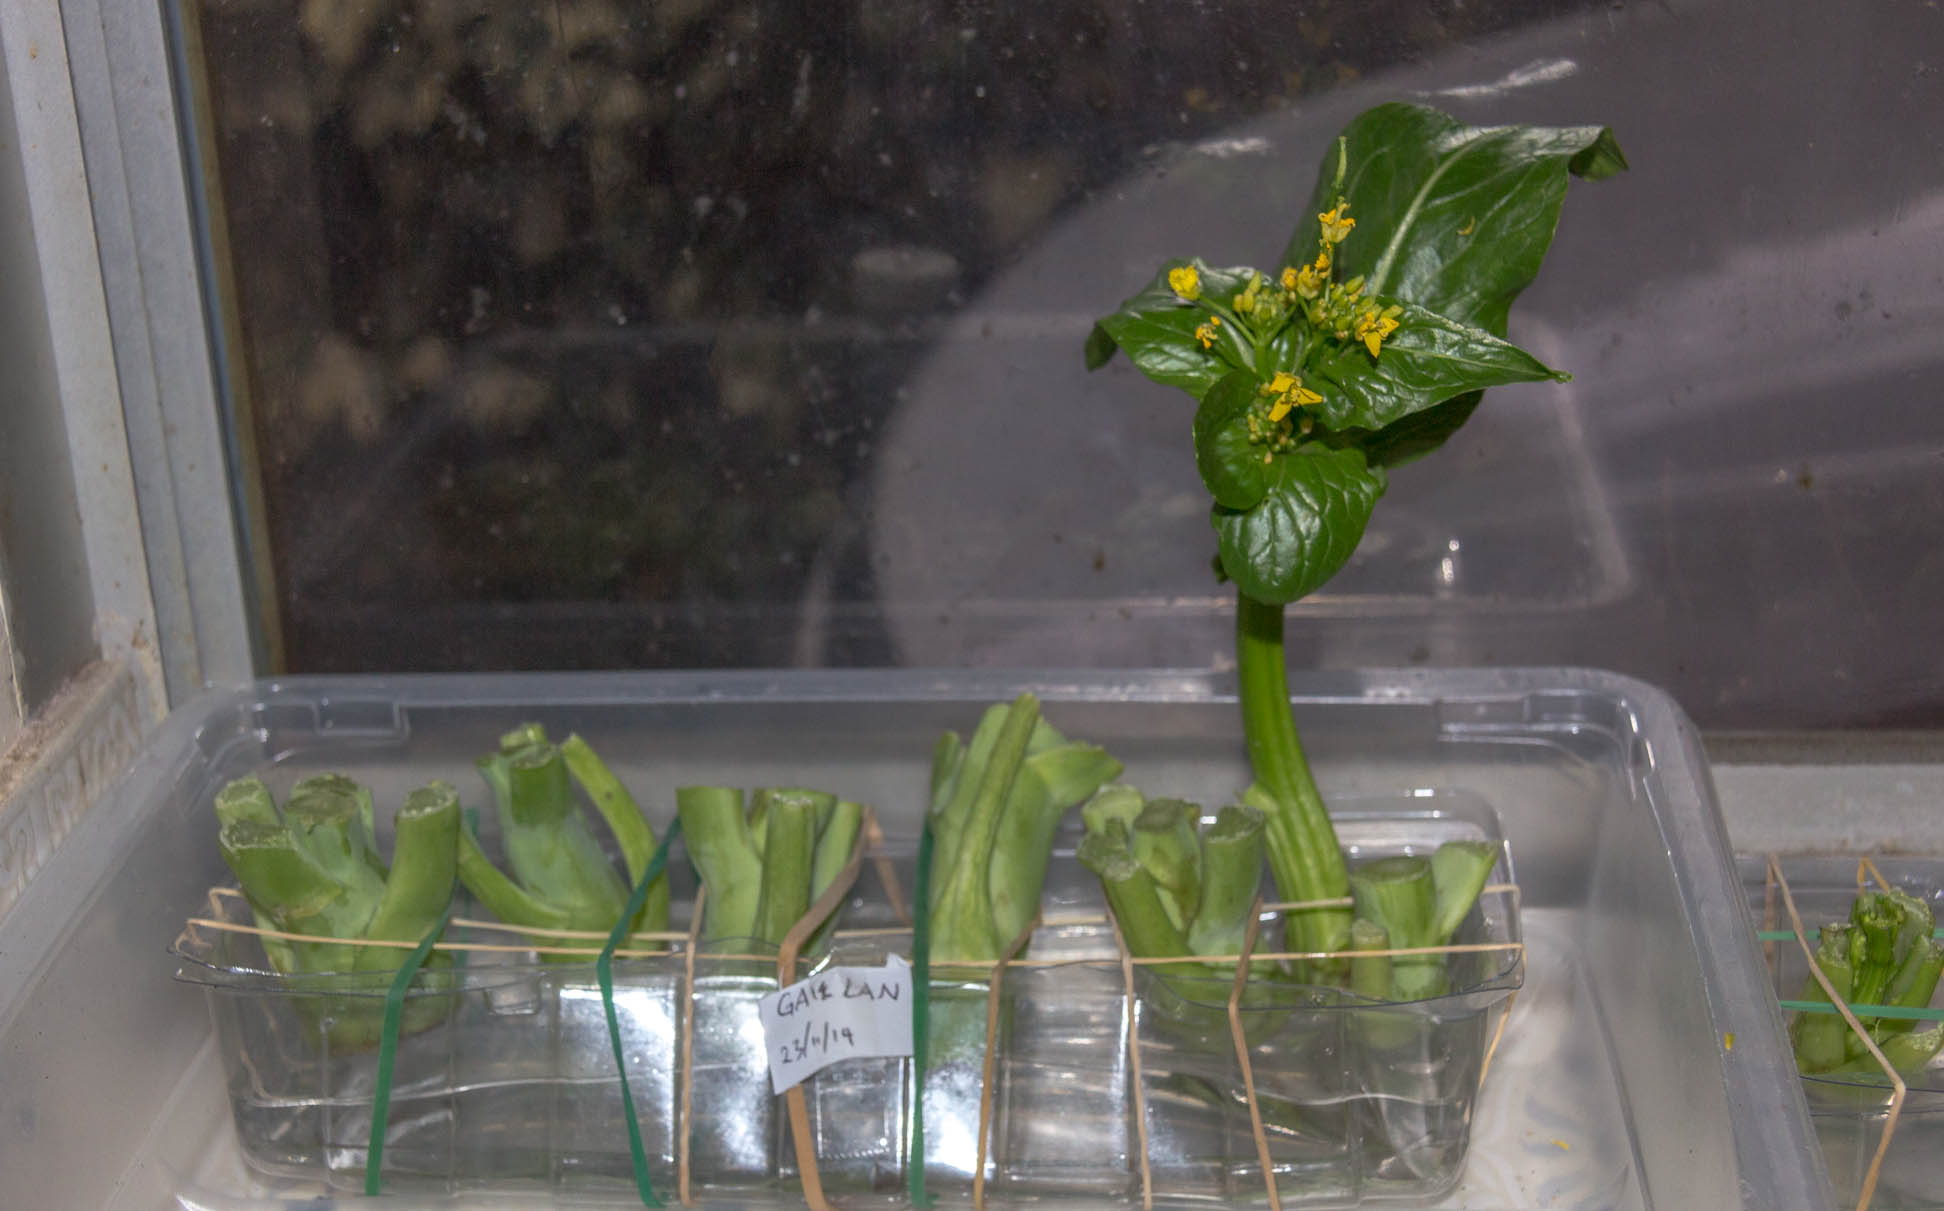 Gai Lan off cuts suspended with rubber bands in water on the window still